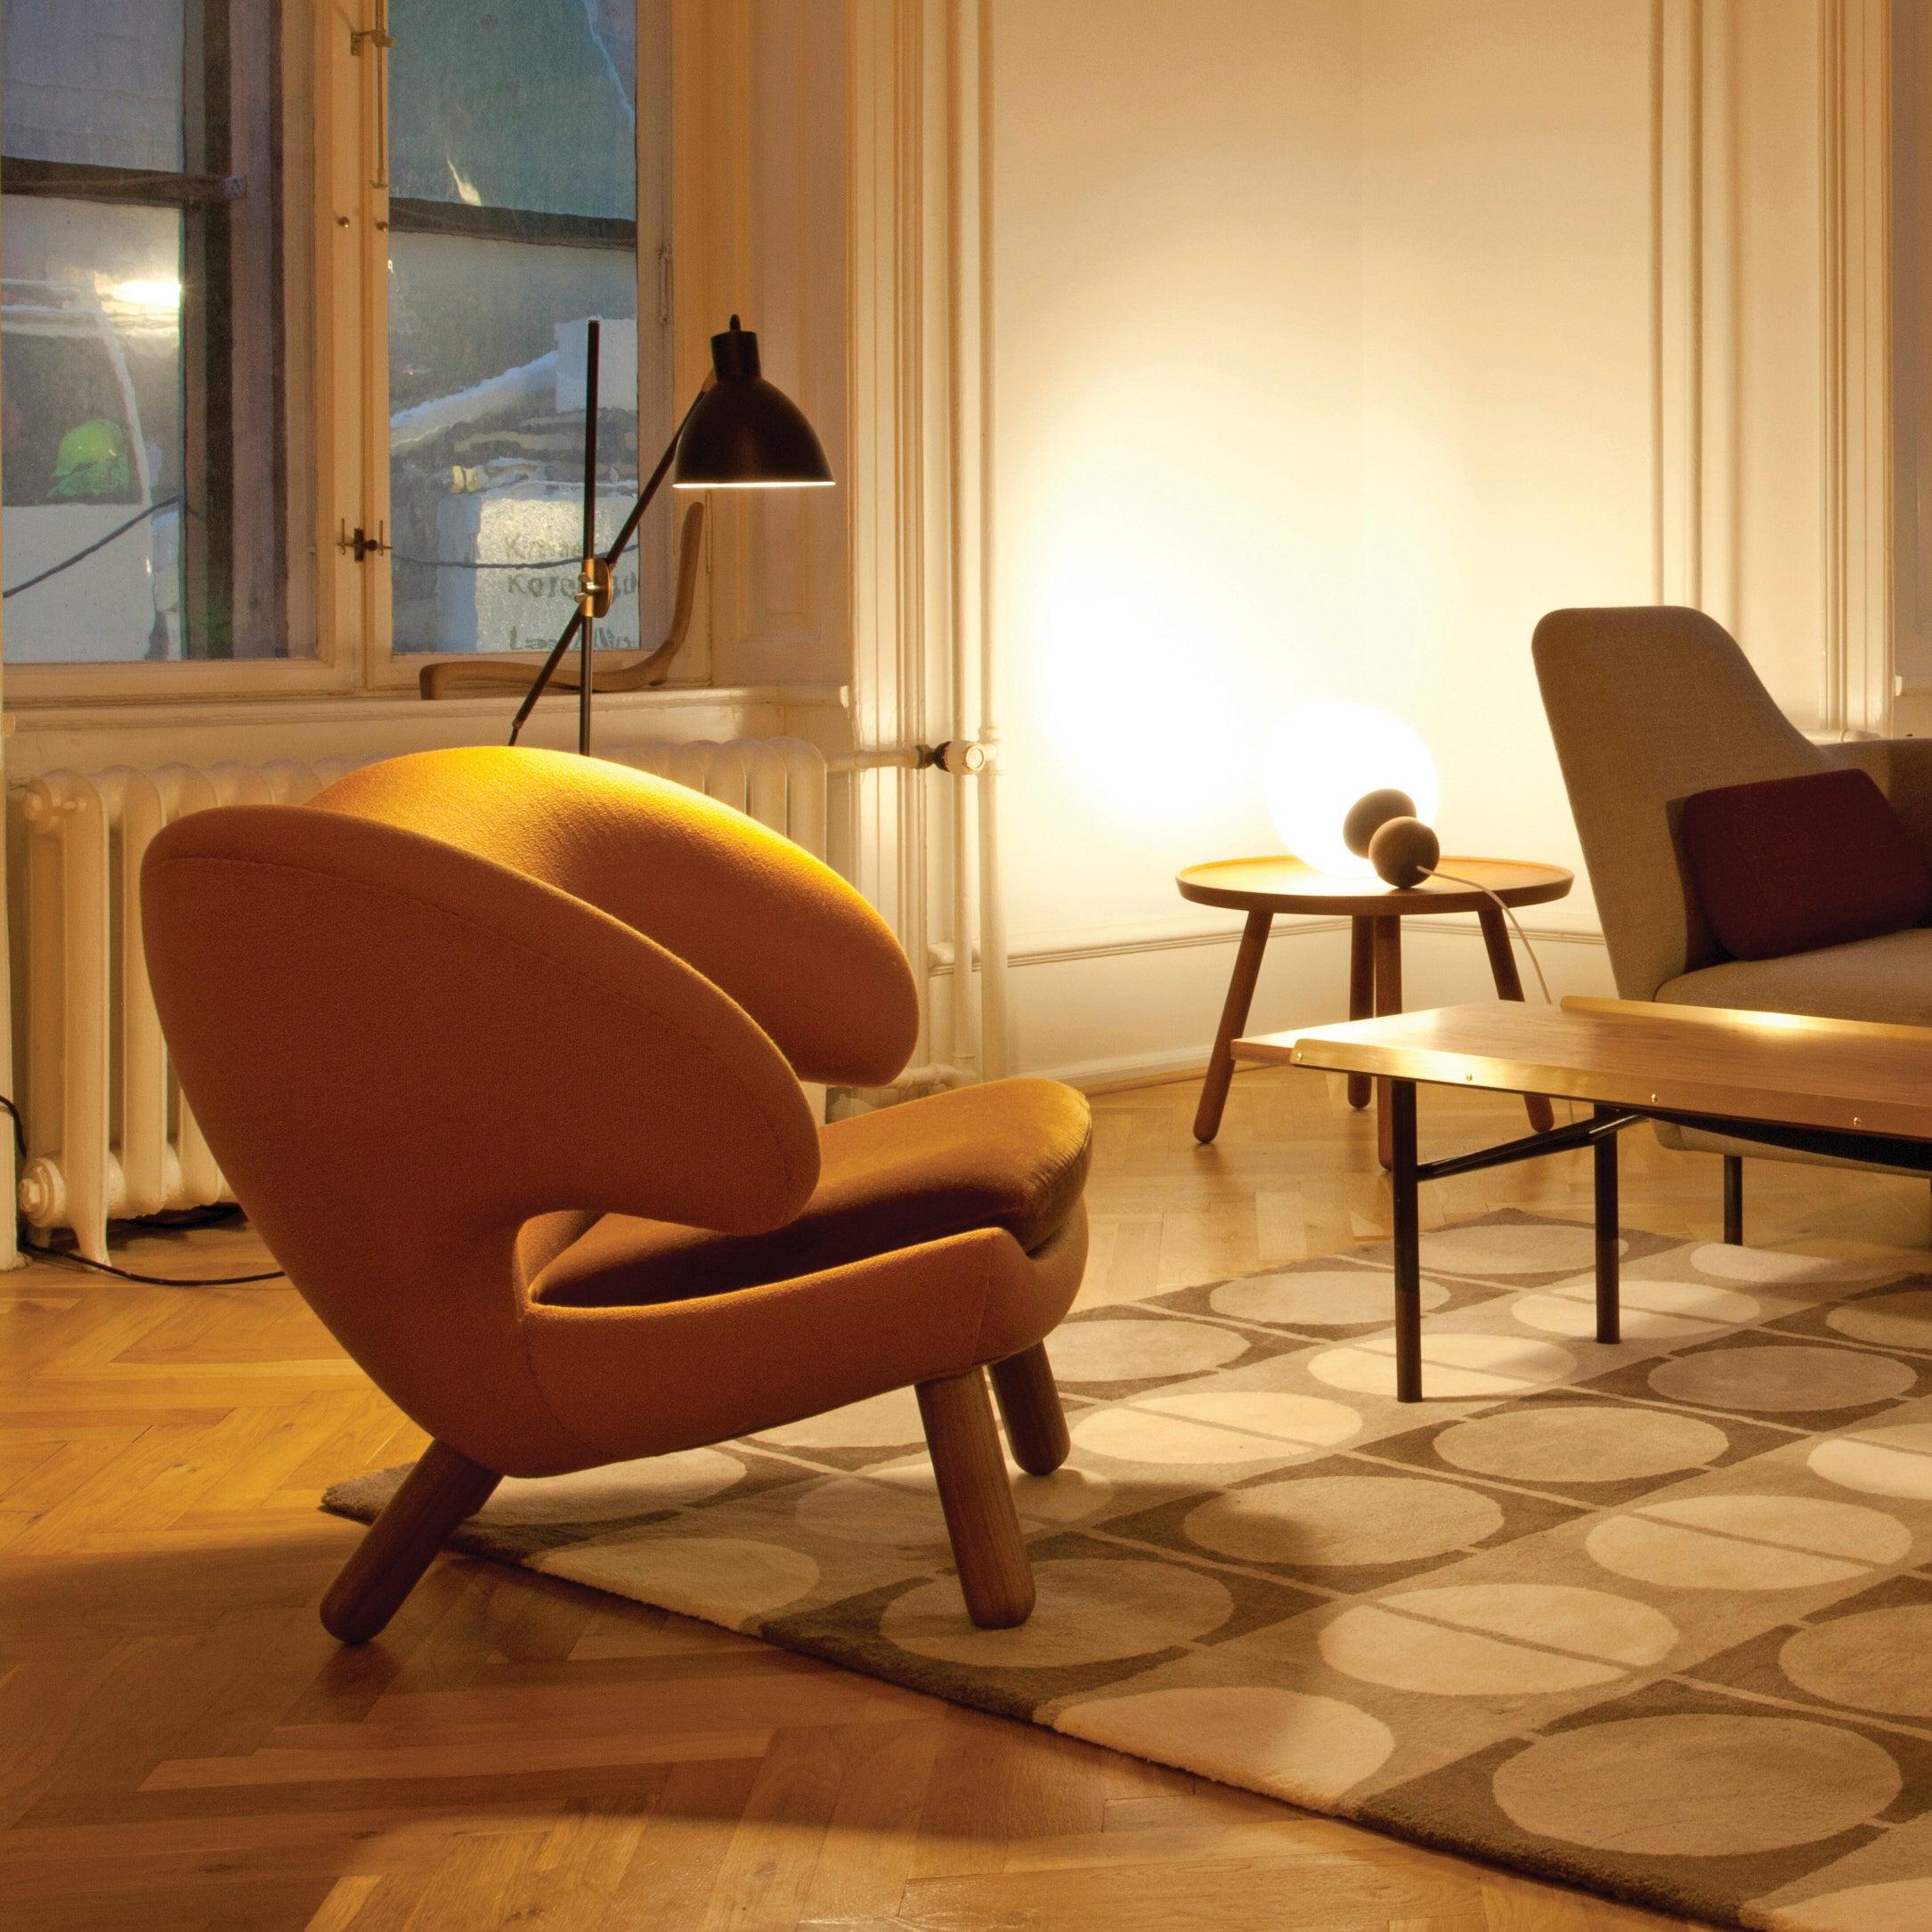 Modern Set of Two Pelican Chairs Upholstered in Fabric and Wood by Finn Juhl